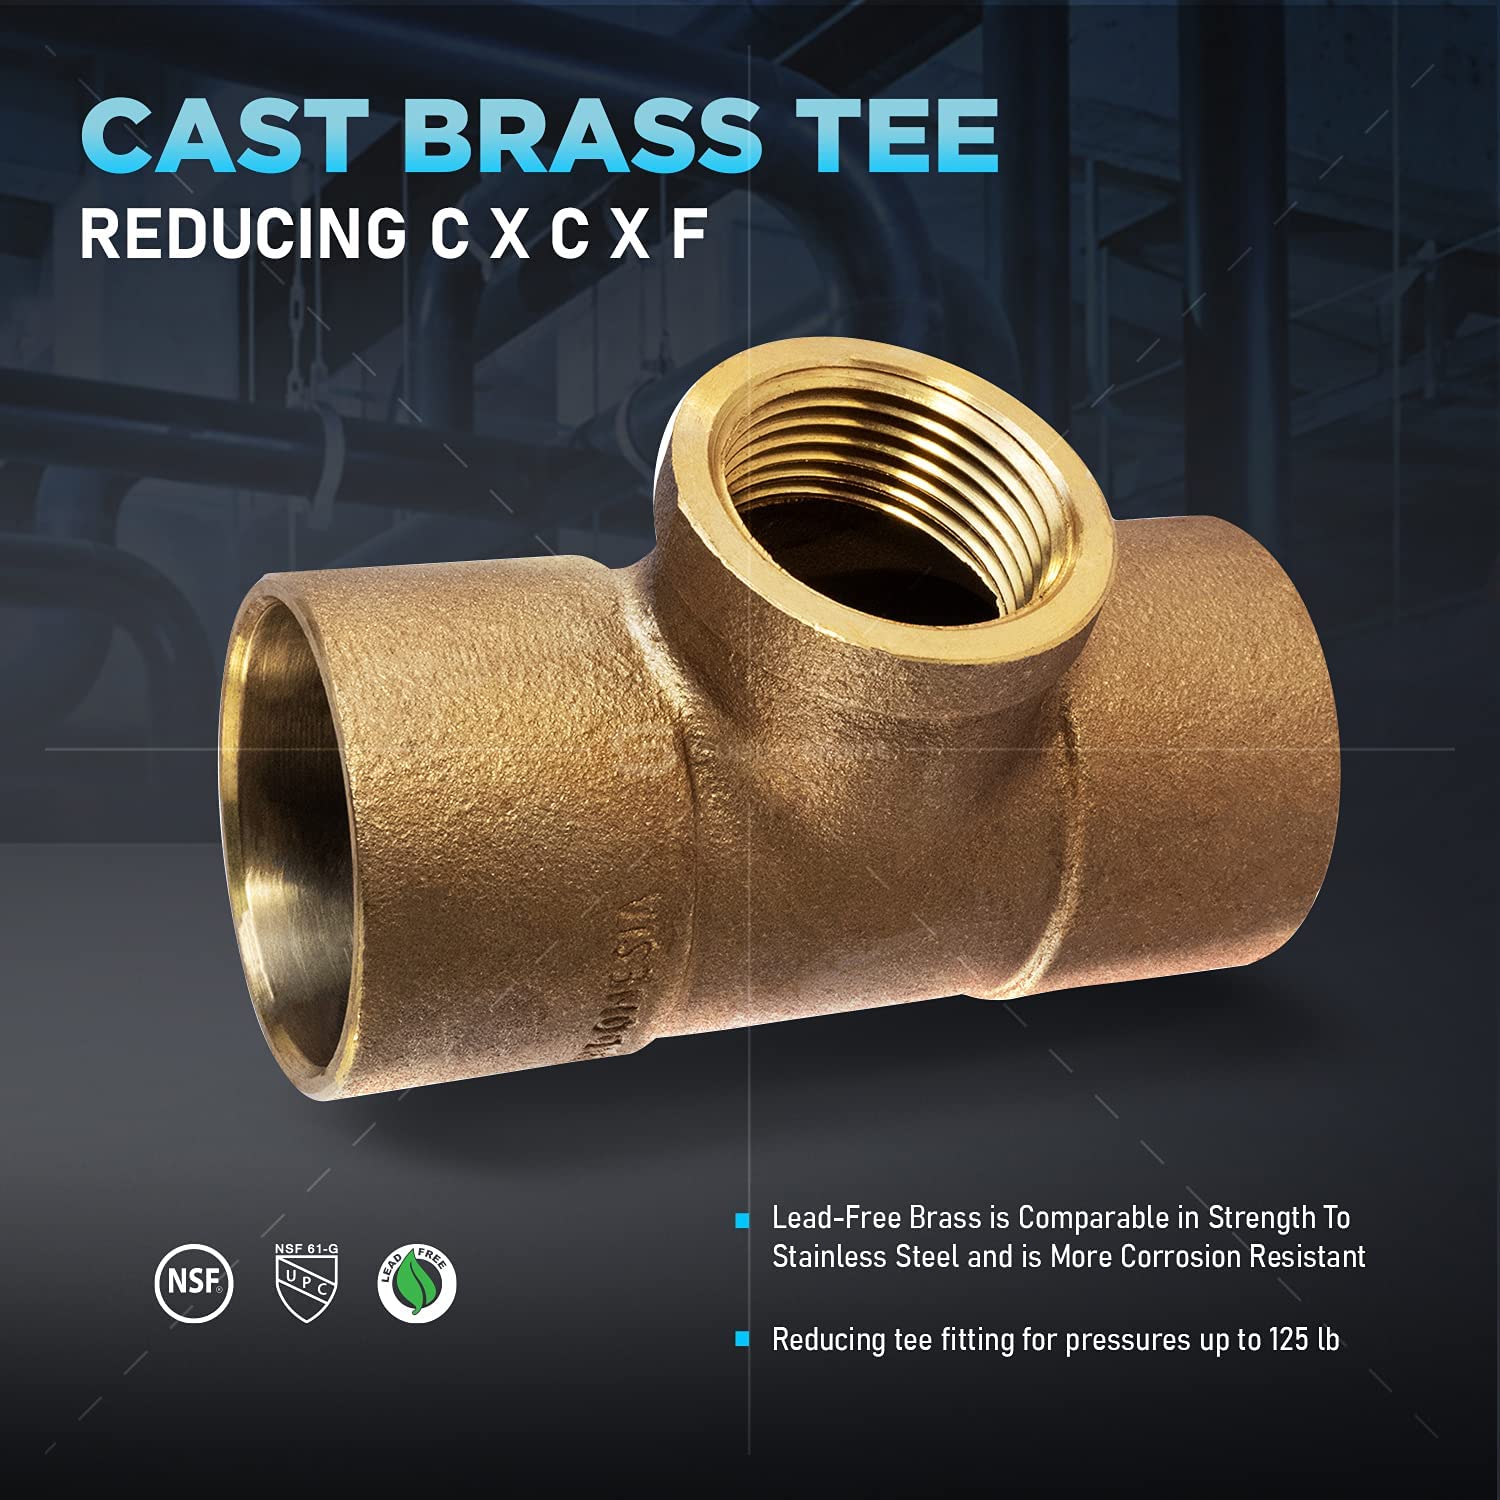 Supply Giant CCFT1134-NL CXCXF Lead Free Cast Brass Tee Fitting with Solder Cups and Female Threaded Branch, 1" x 1" x 3/4" - image 4 of 6